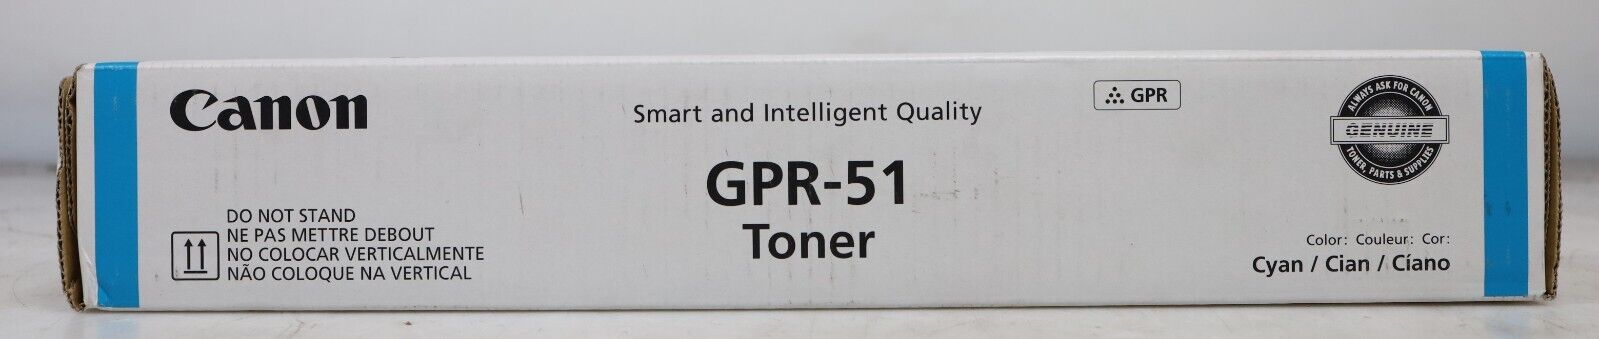 NEW Sealed Genuine Canon GPR-51 Cyan Toner for C250 350